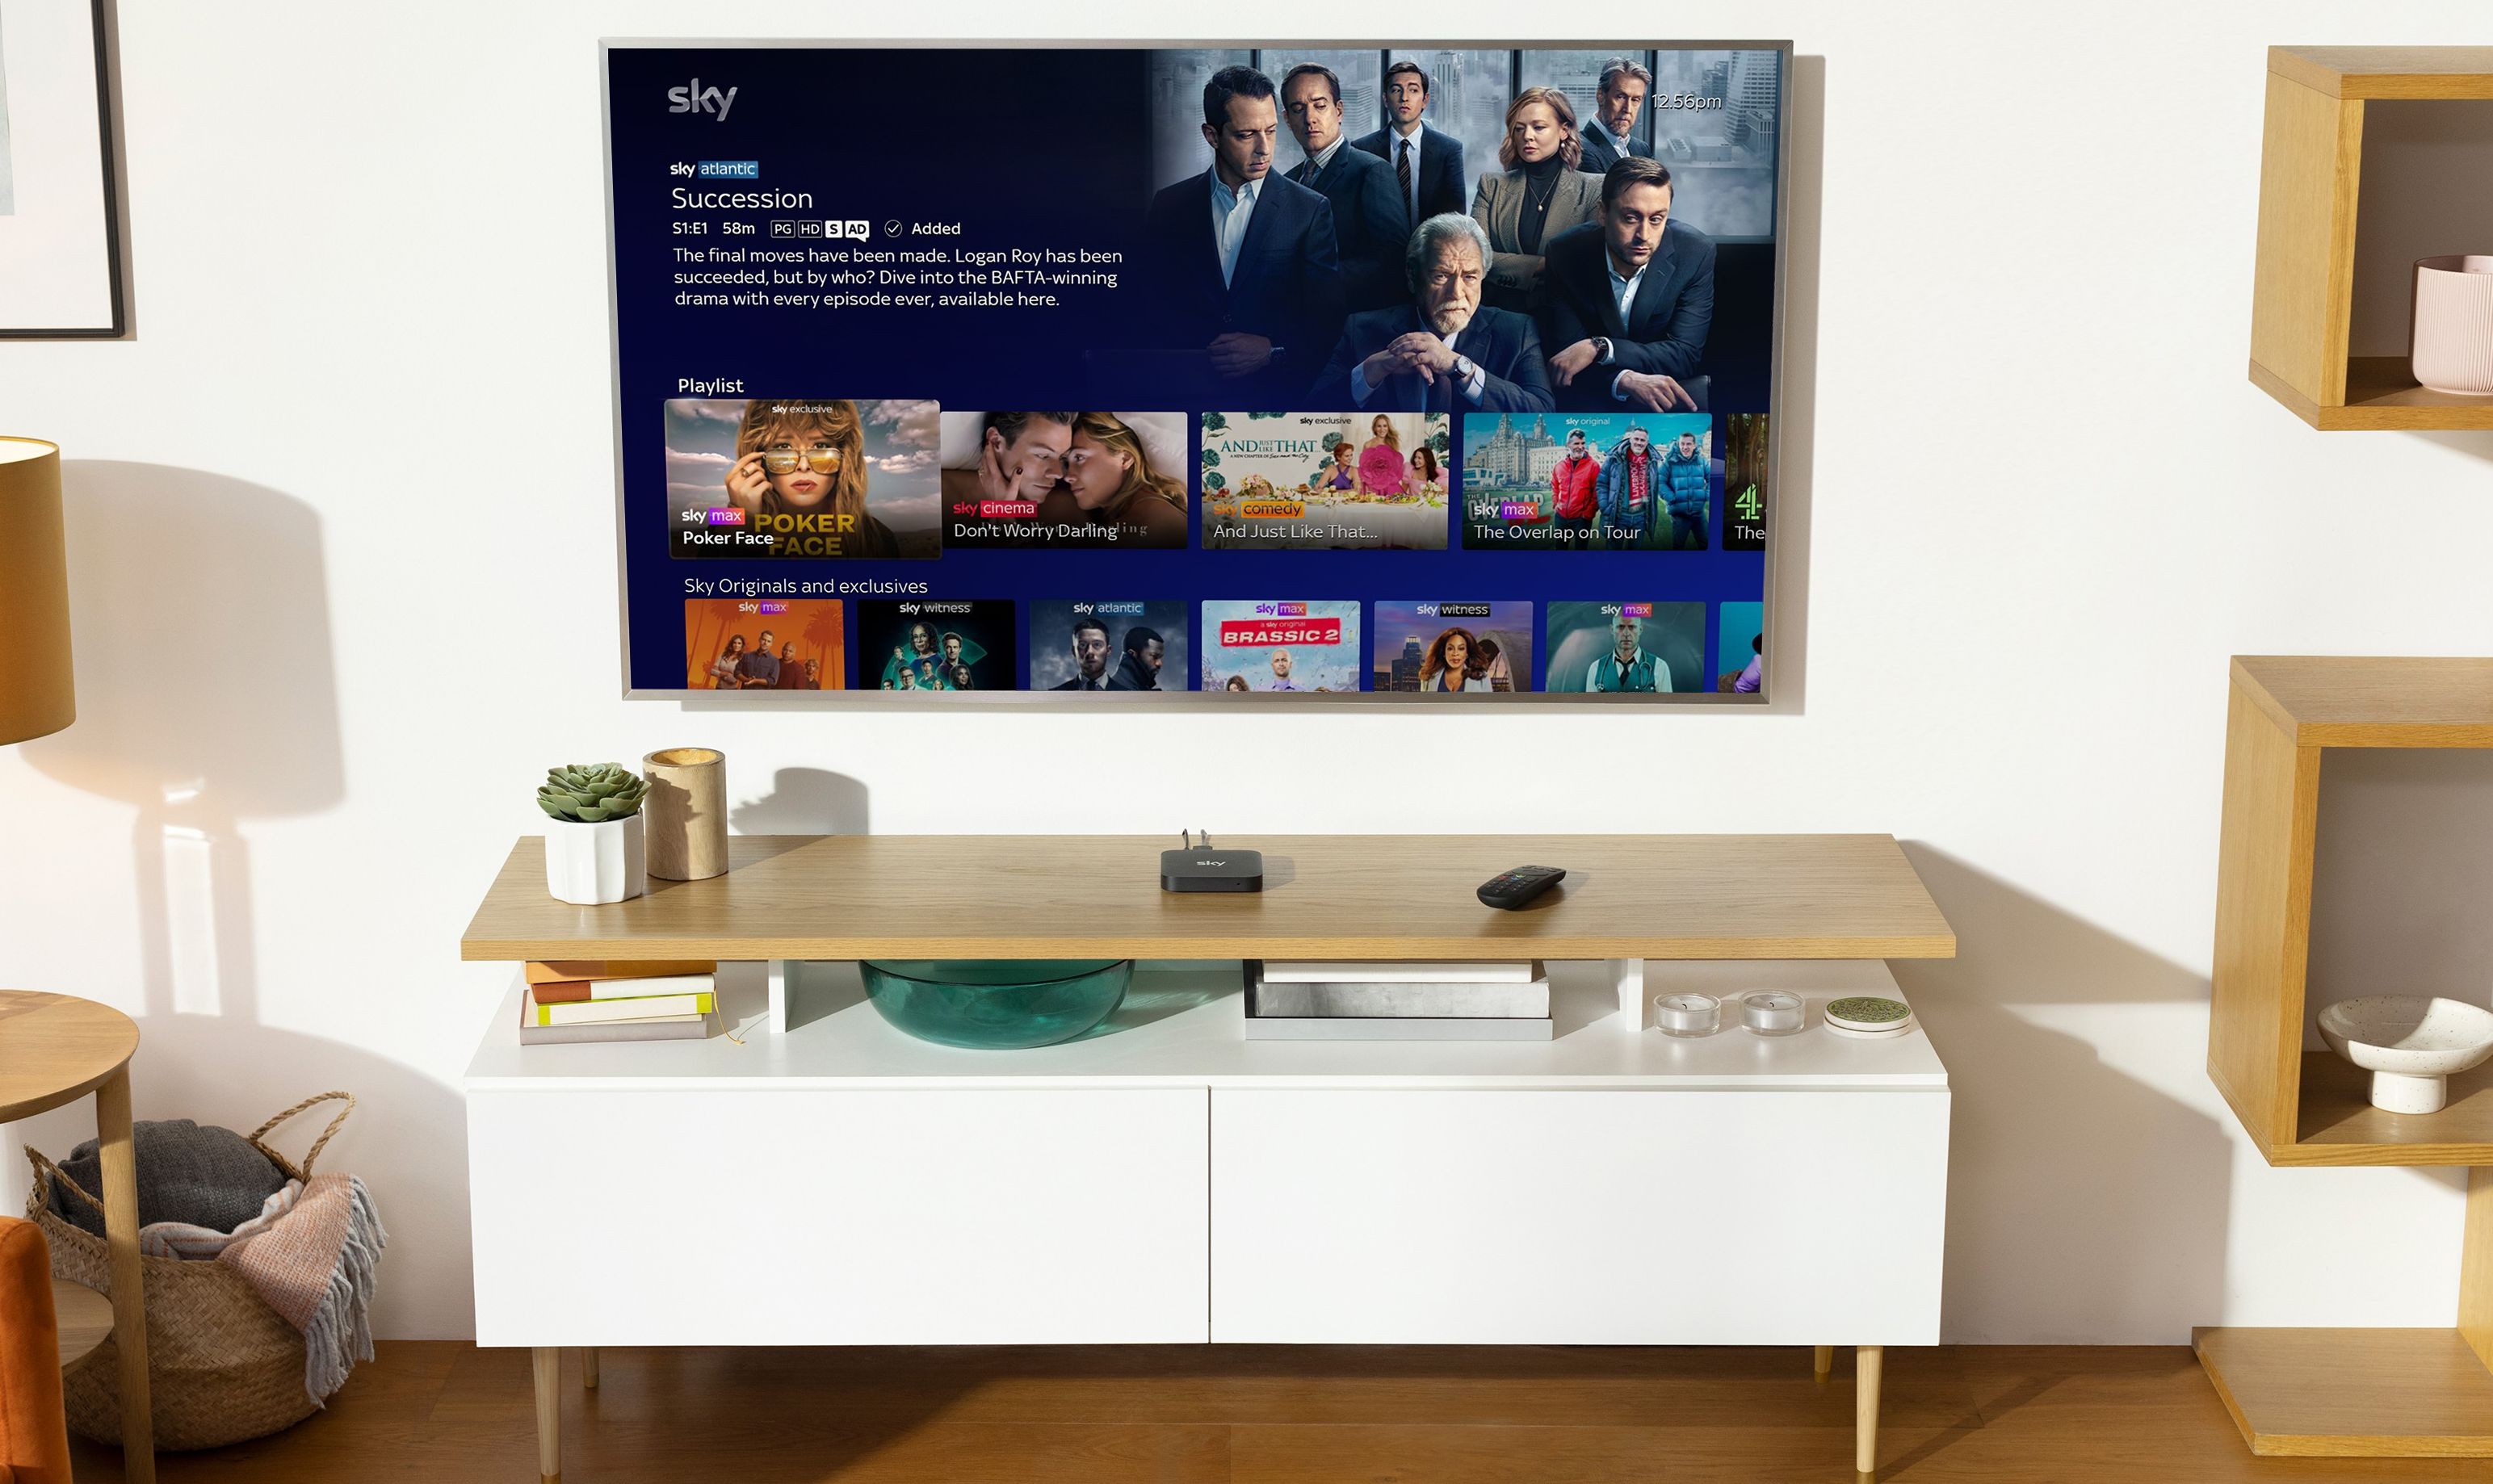 sky stream box is pictured on a media unit with a flatscreen tv showing succession